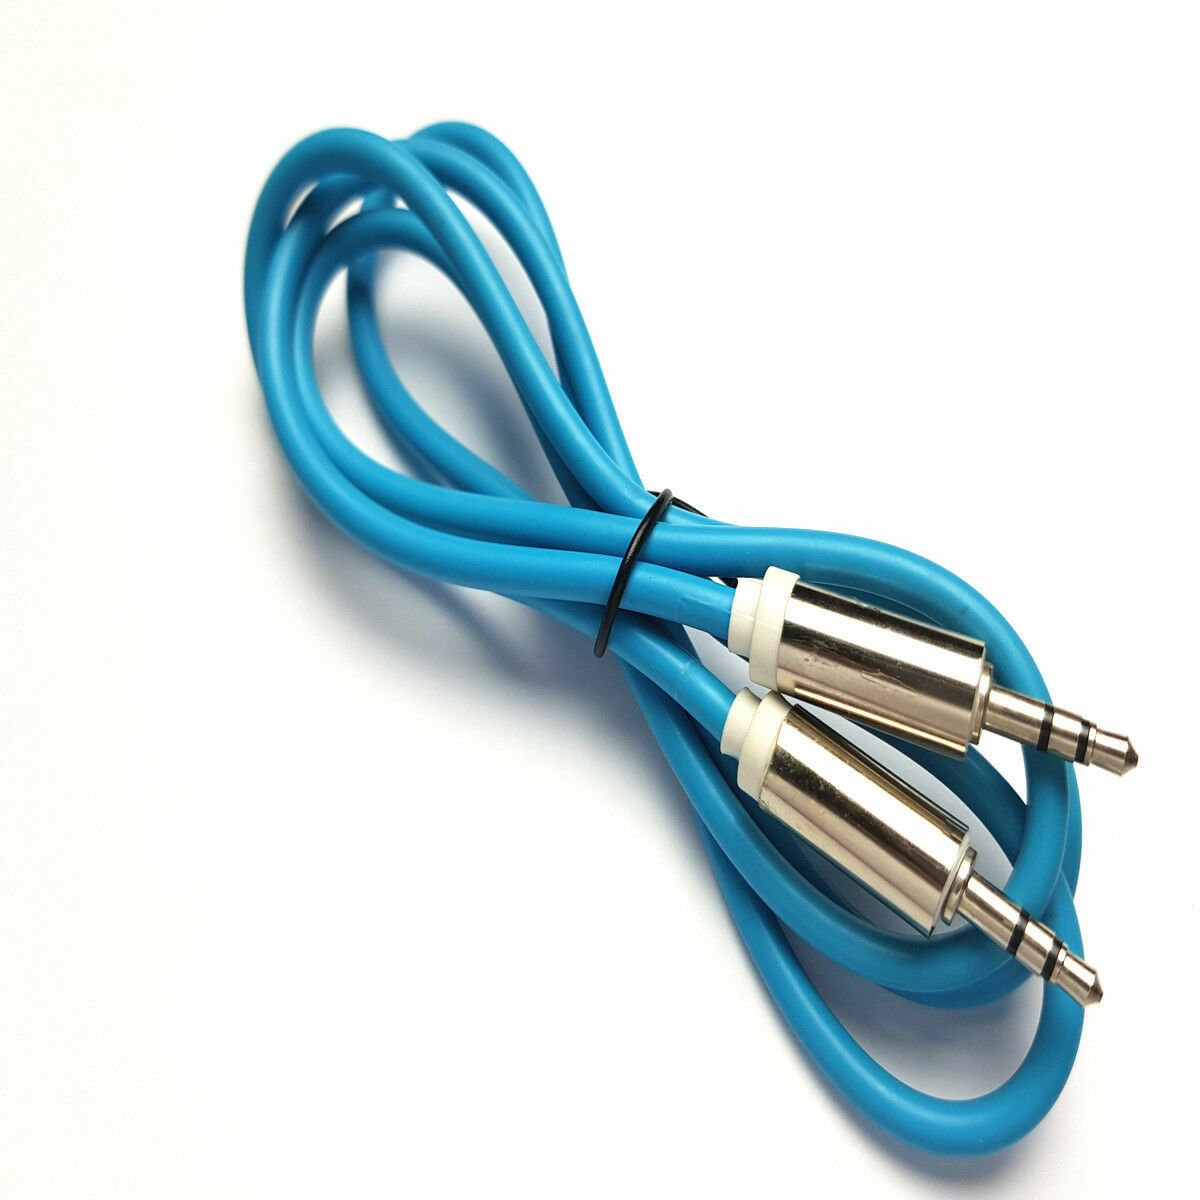 1M-35mm-Male-to-Male-Car-Stereo-Audio-Auxiliary-AUX-Cable-Wire-MP3-PC-blue-253970356677-2.jpg